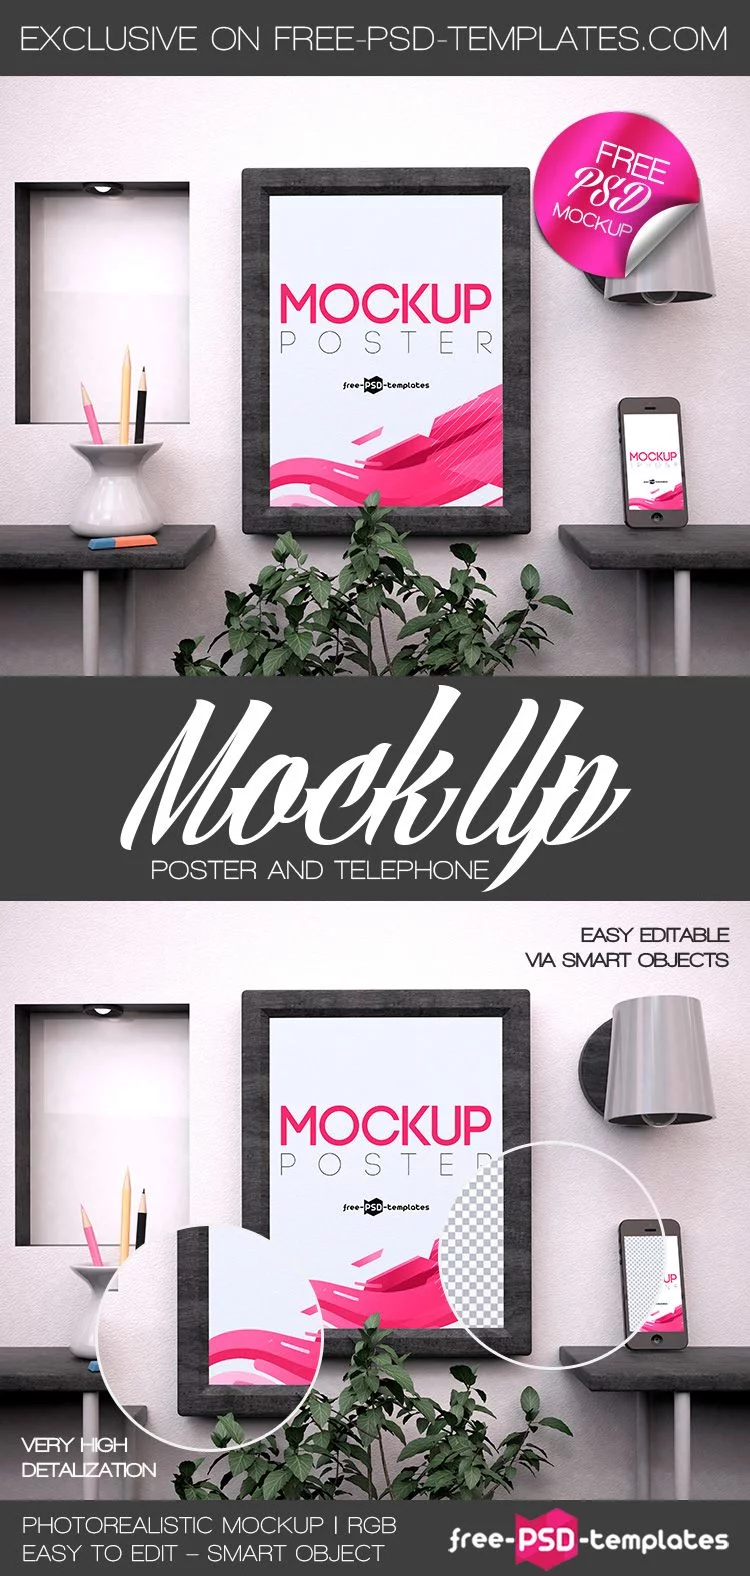 Free Poster and Telephone Mock-up in PSD